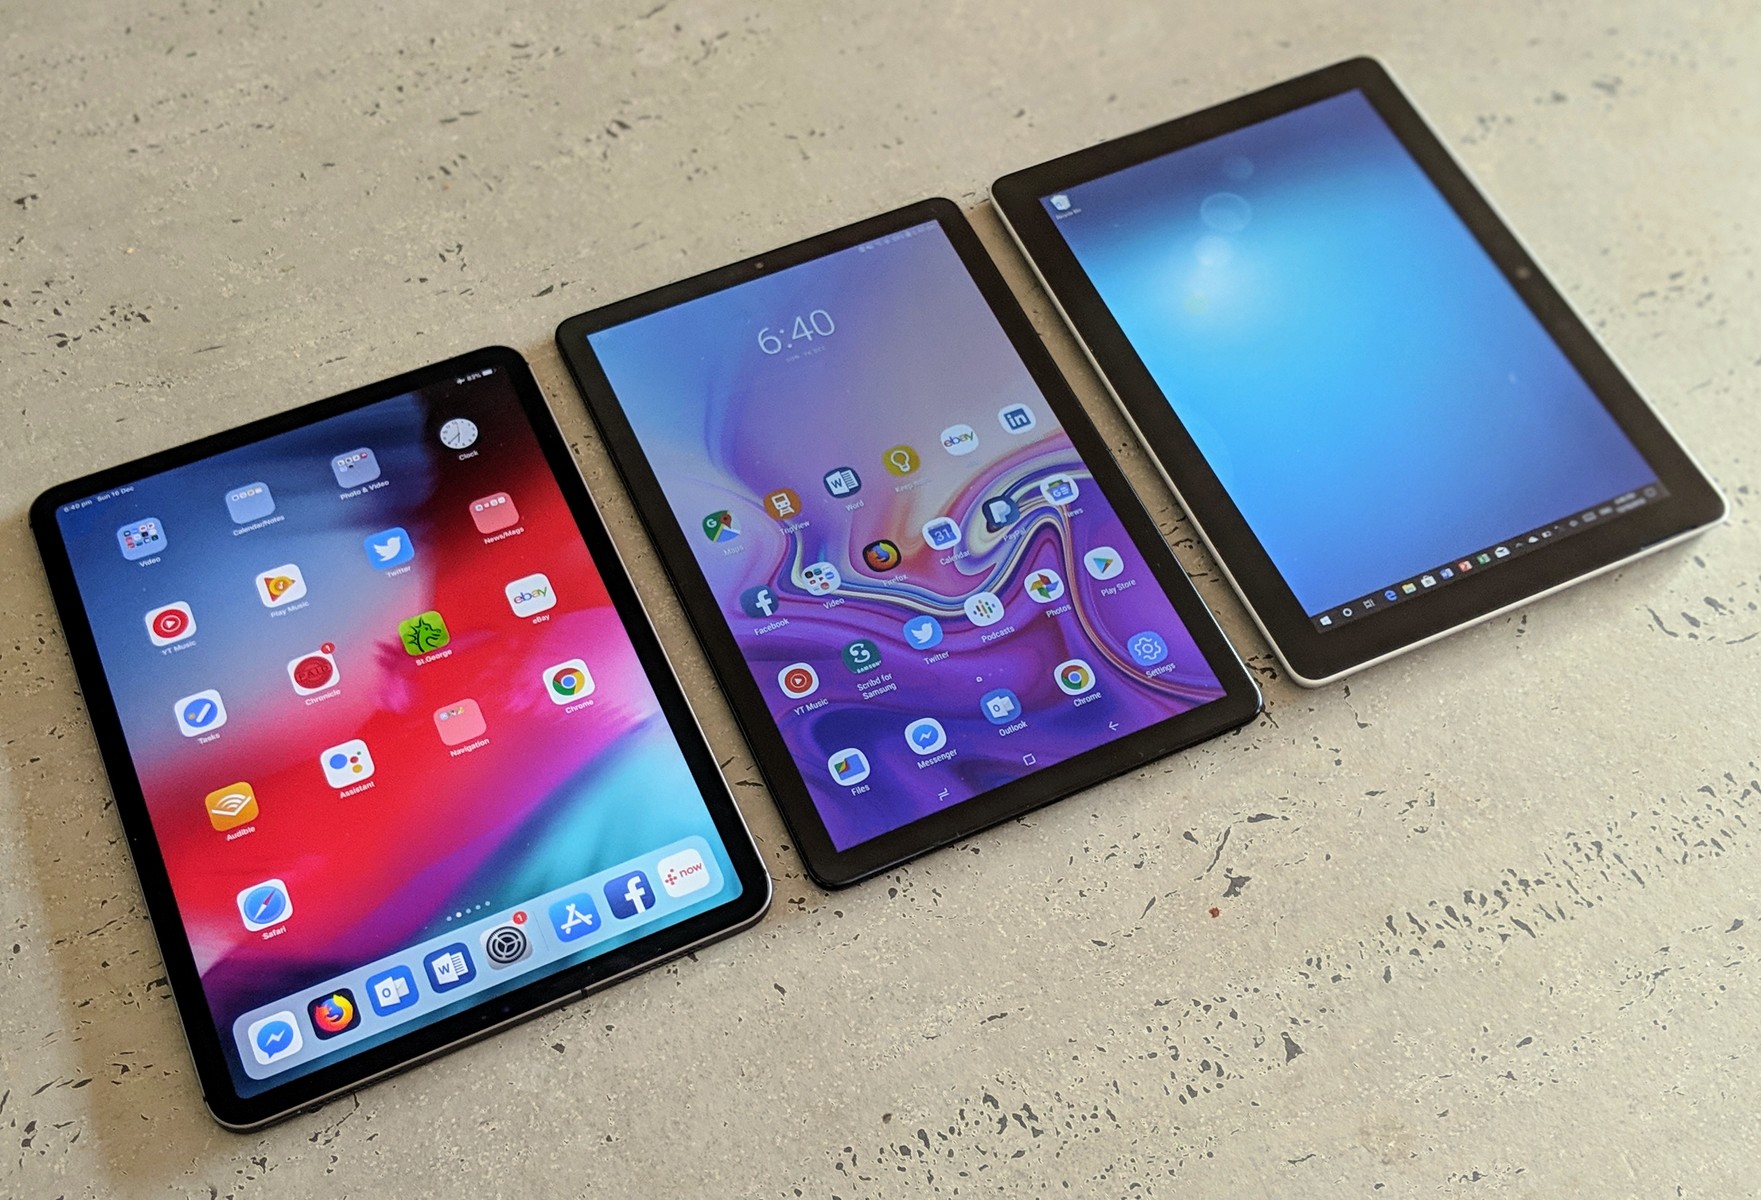 Apple could launch two new low-priced iPads in early 2019